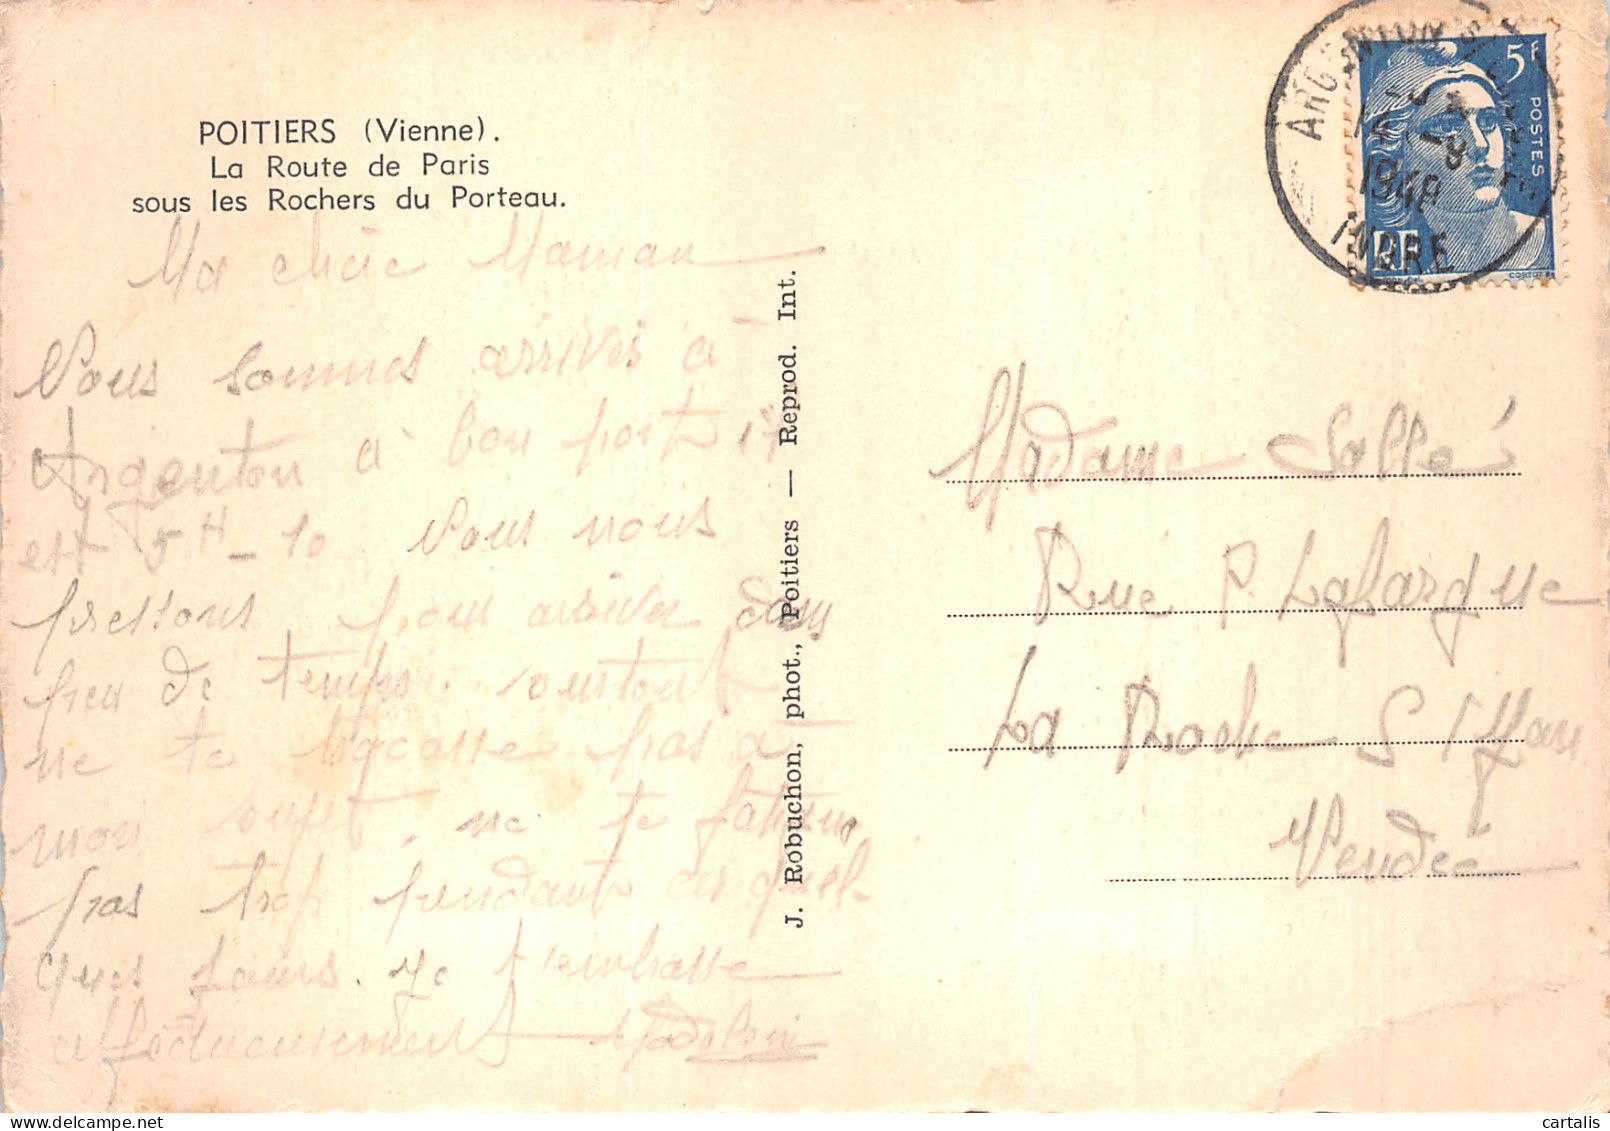 86-POITIERS-N° 4449-C/0343 - Poitiers